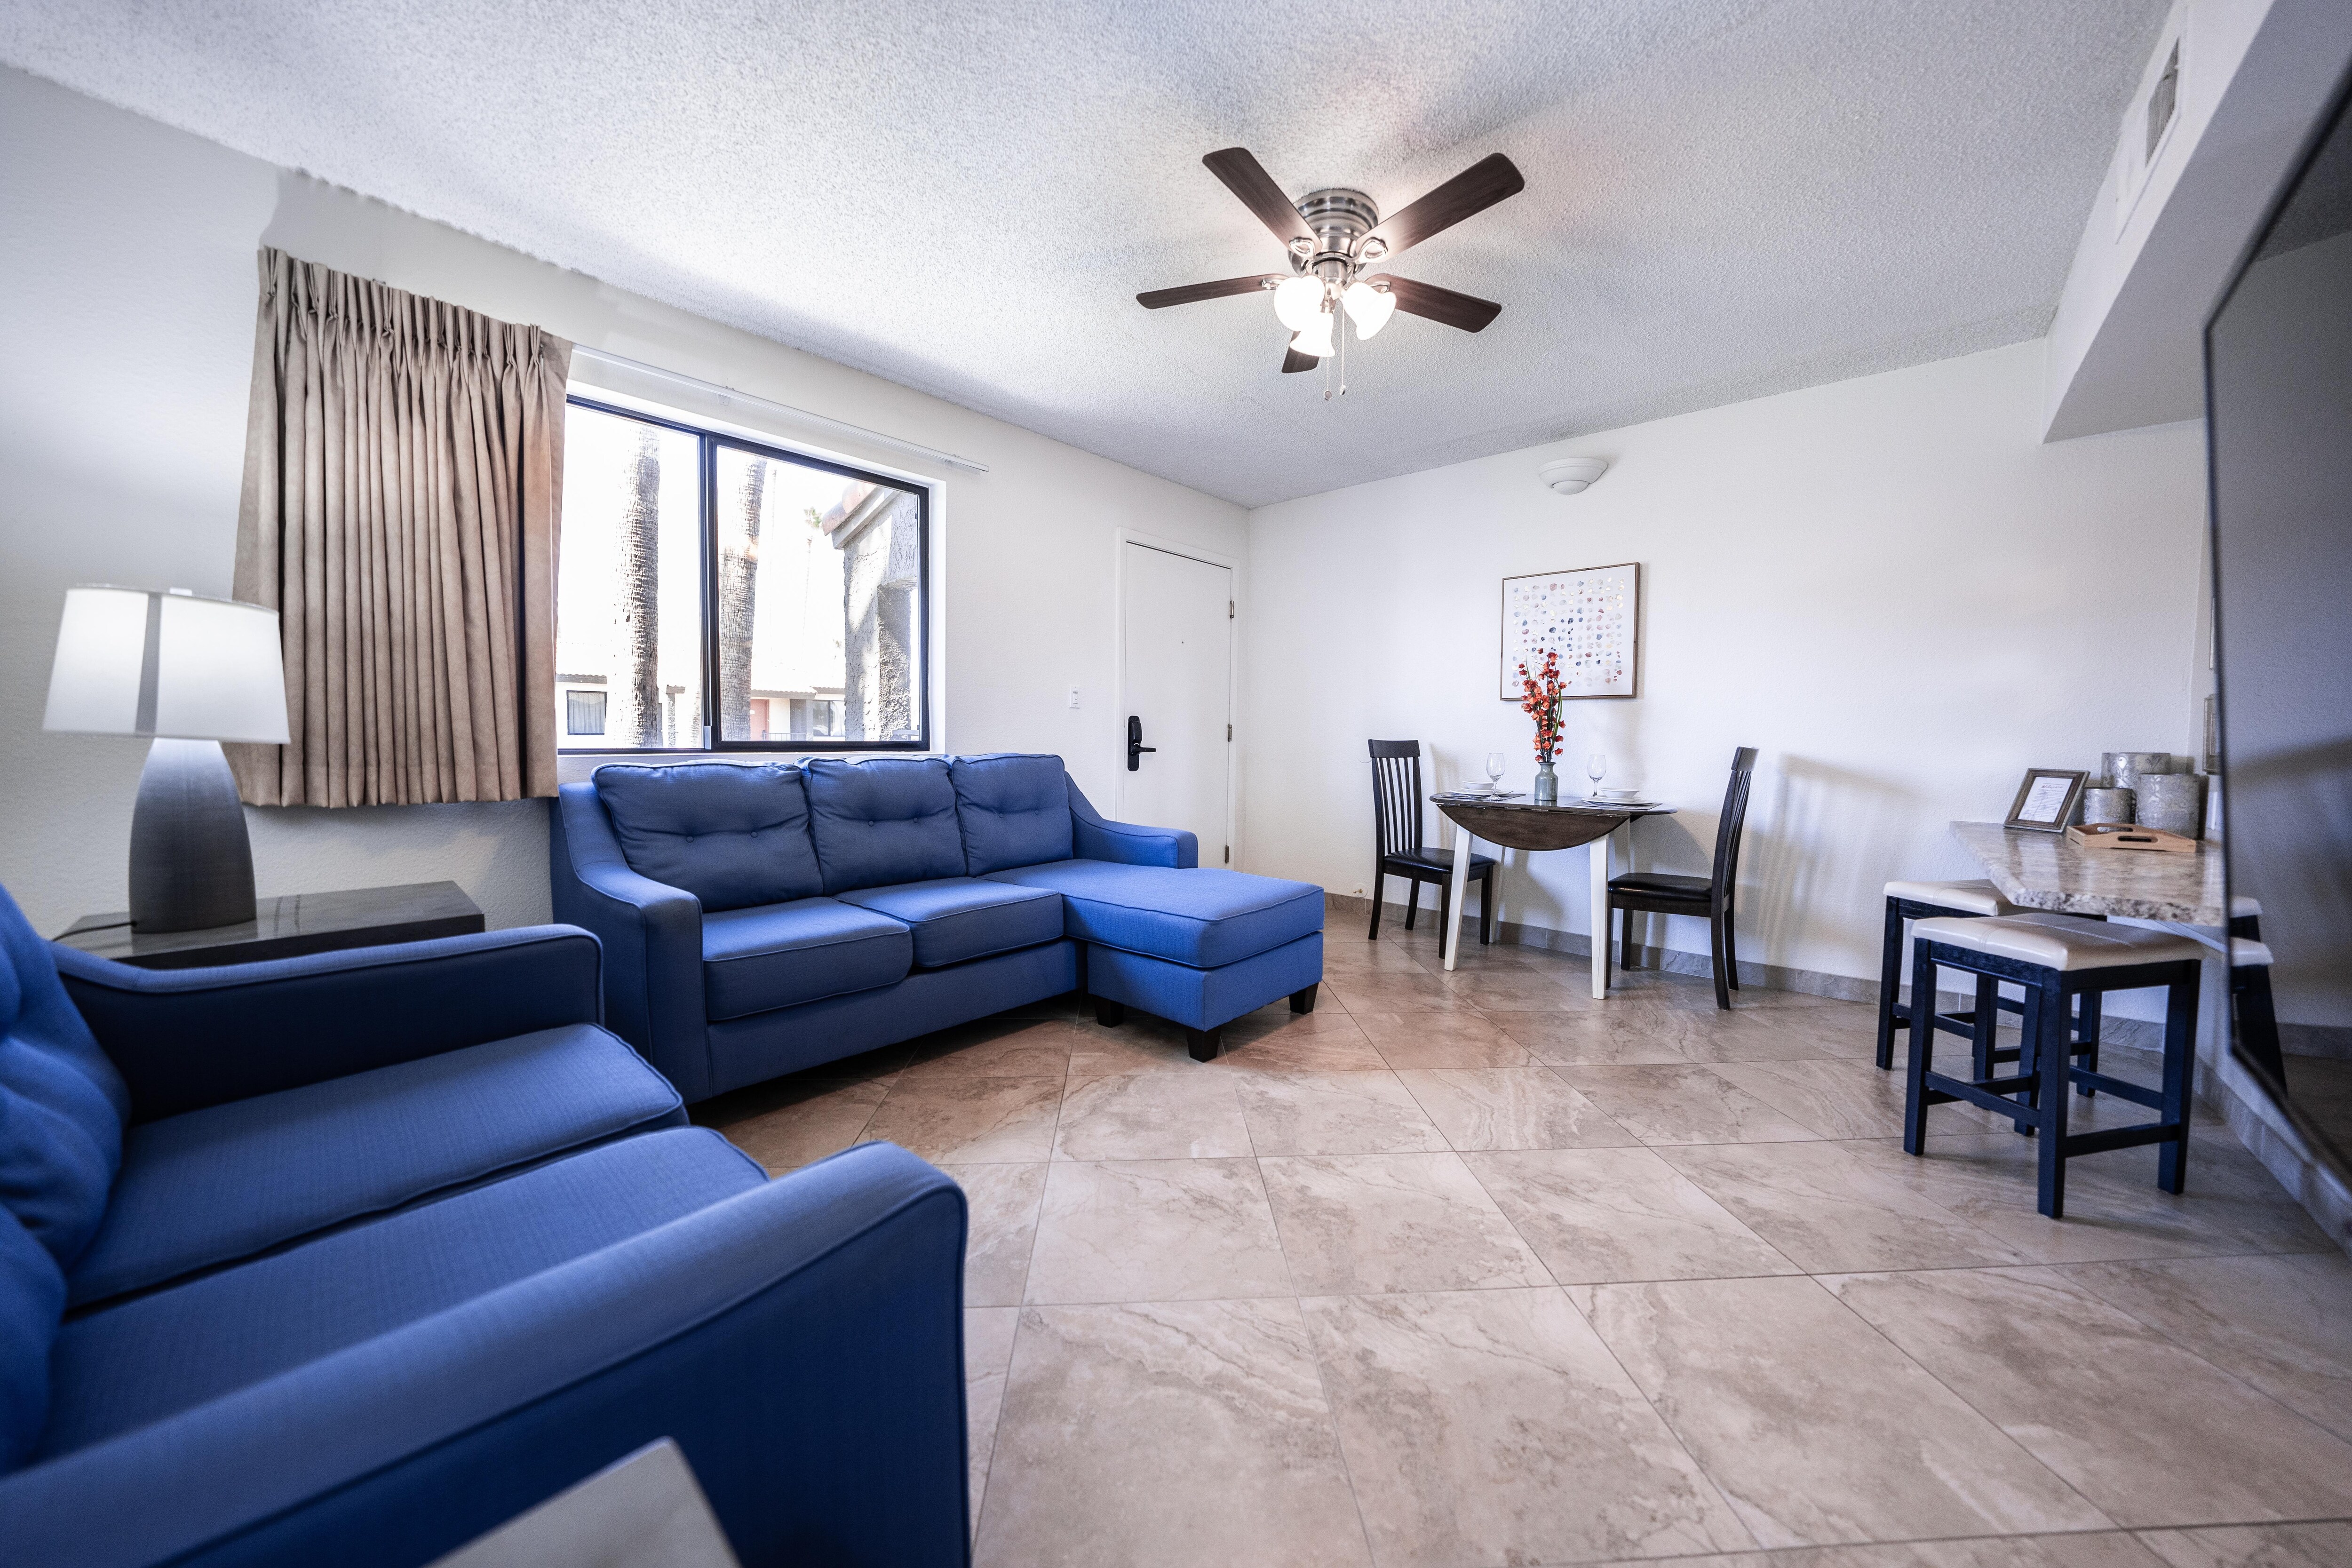 Property Image 1 - Scottsdale’s premium short term getaway, Fully furnished 1 bedroom homes, FREE Golf, cable, utilities, Wi-